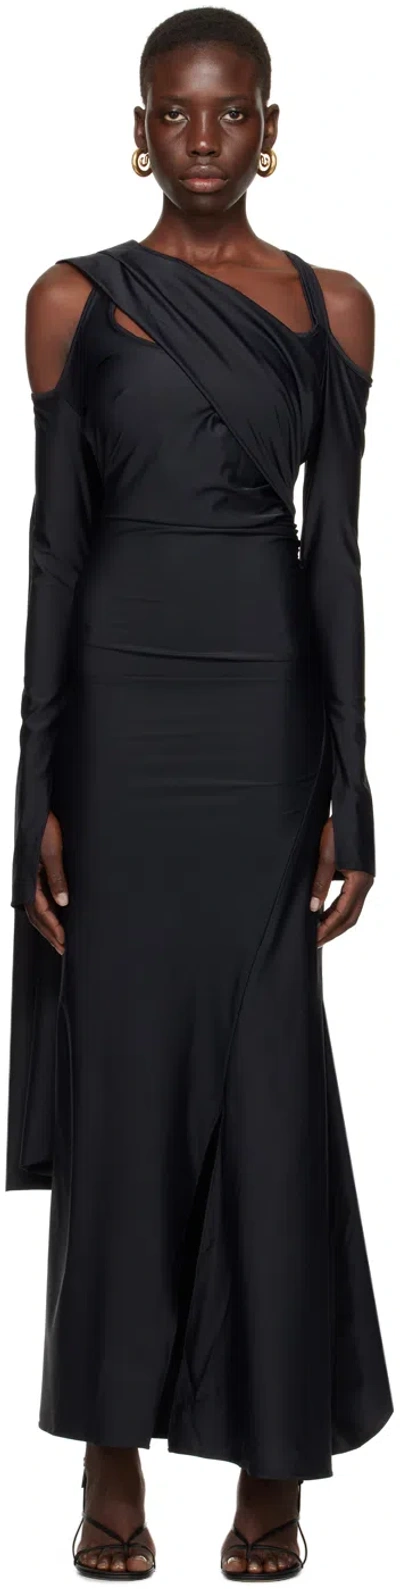 Srvc Womens Black Siren Draped-panel Stretch Recycled-polyester Maxi Dress